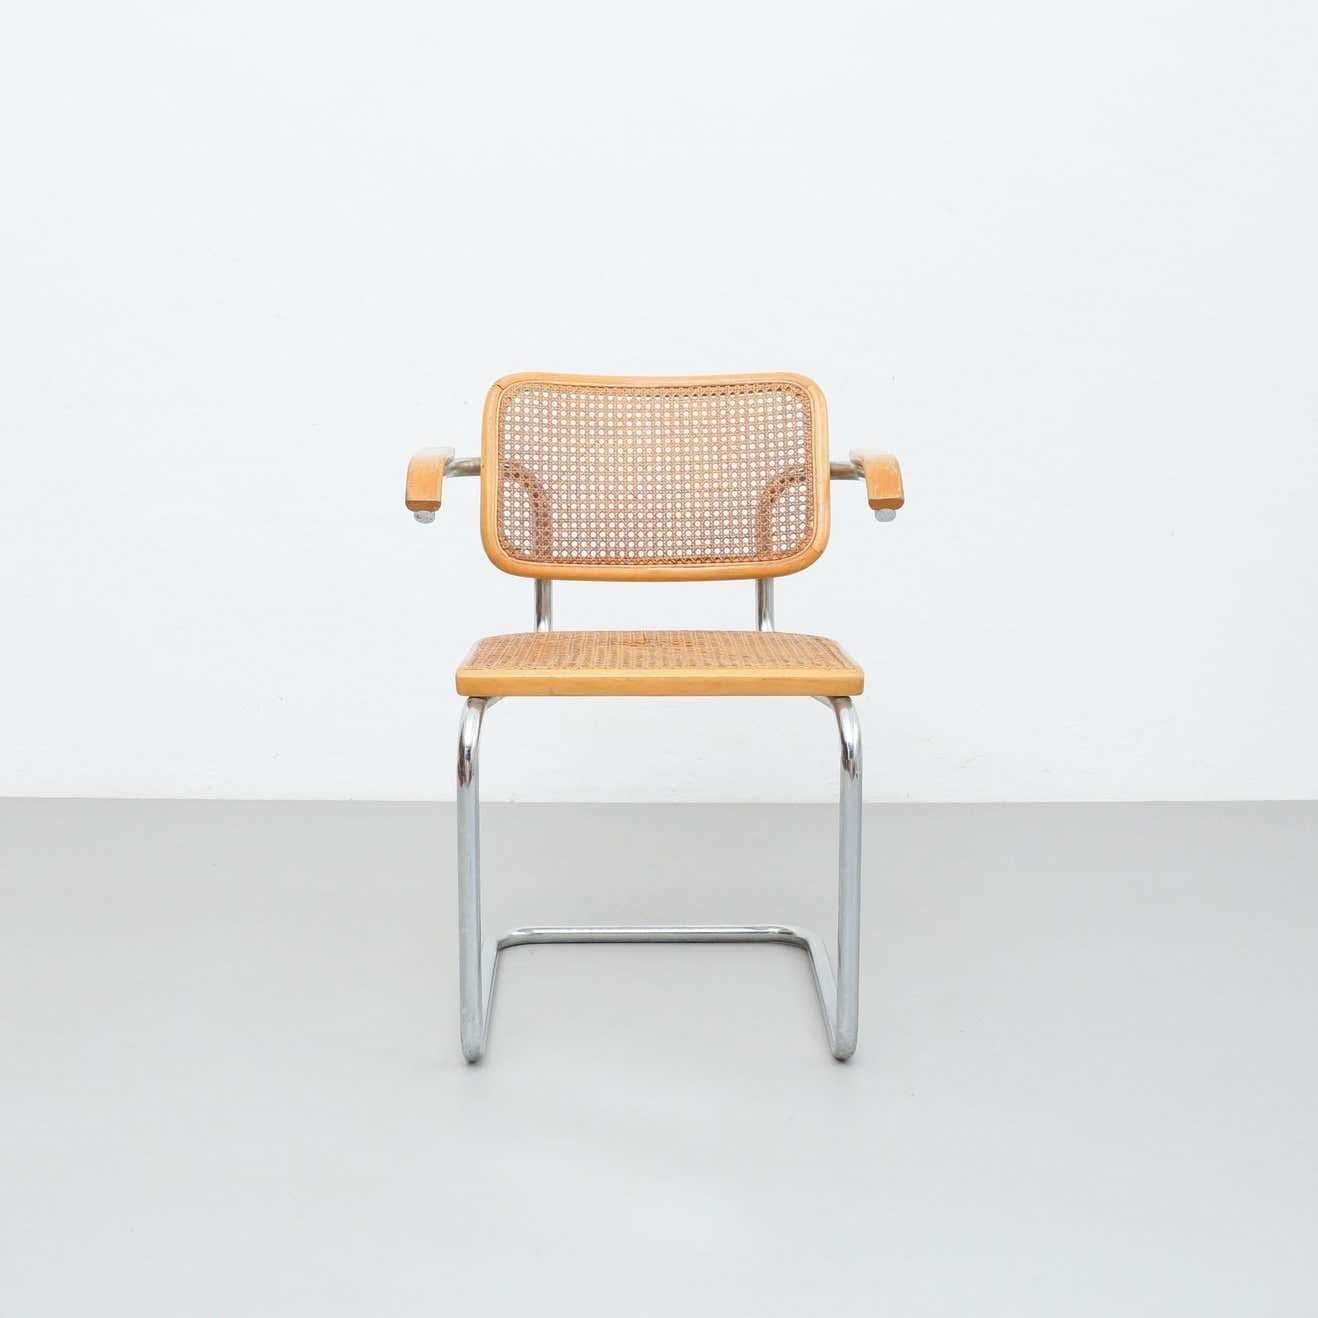 Chair designed by Marcel Breuer, manufactured by Gavina, Italy.

In original condition, with minor wear consistent with age and use, preserving a beautiful patina.
Seat has a small broken part on the